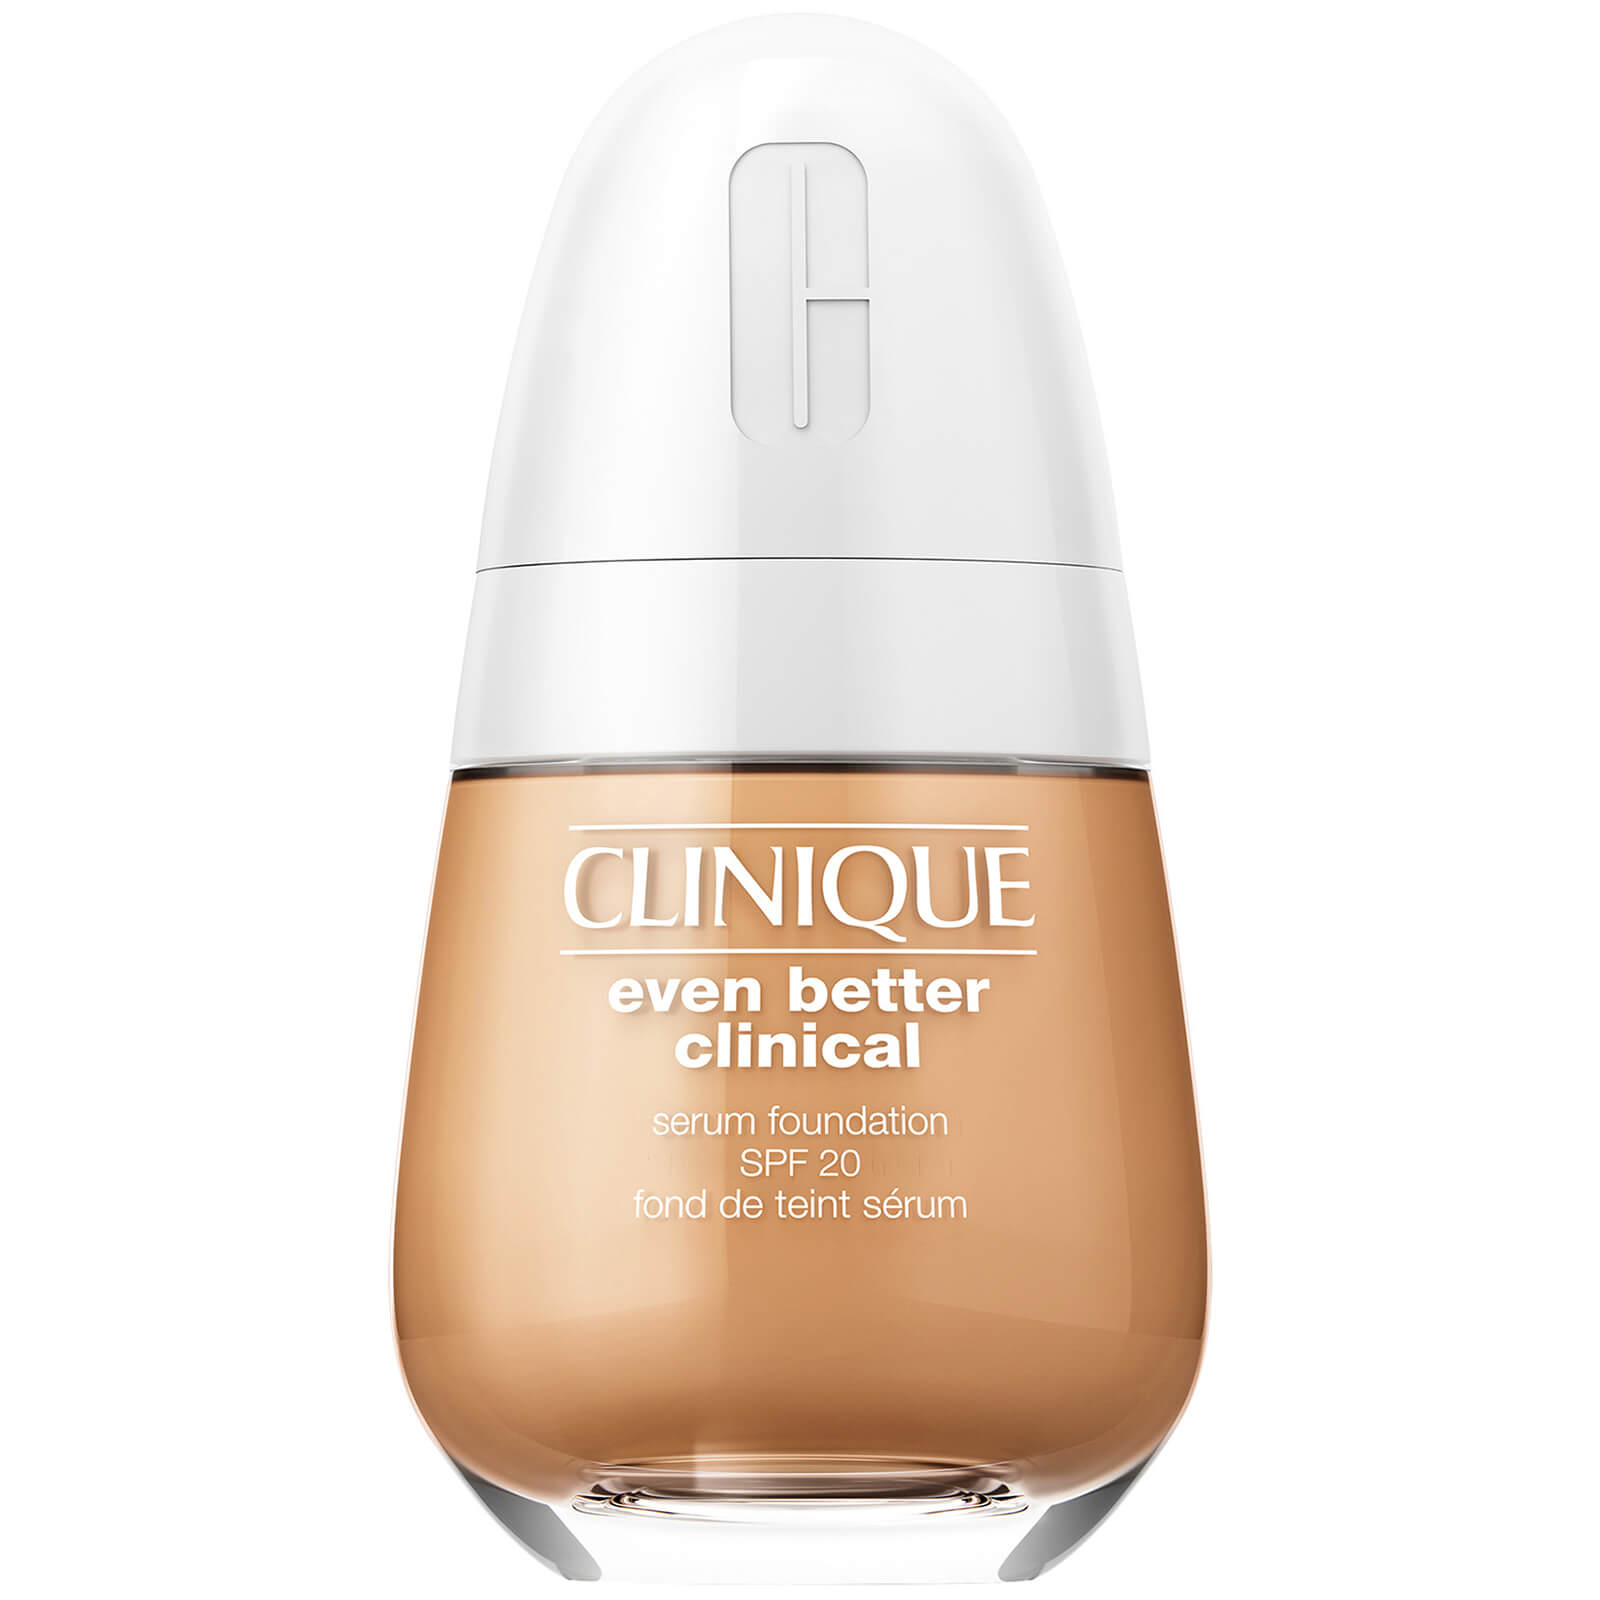 Clinique Even Better Clinical Serum Foundation SPF20 30ml (Various Shades) - Oat